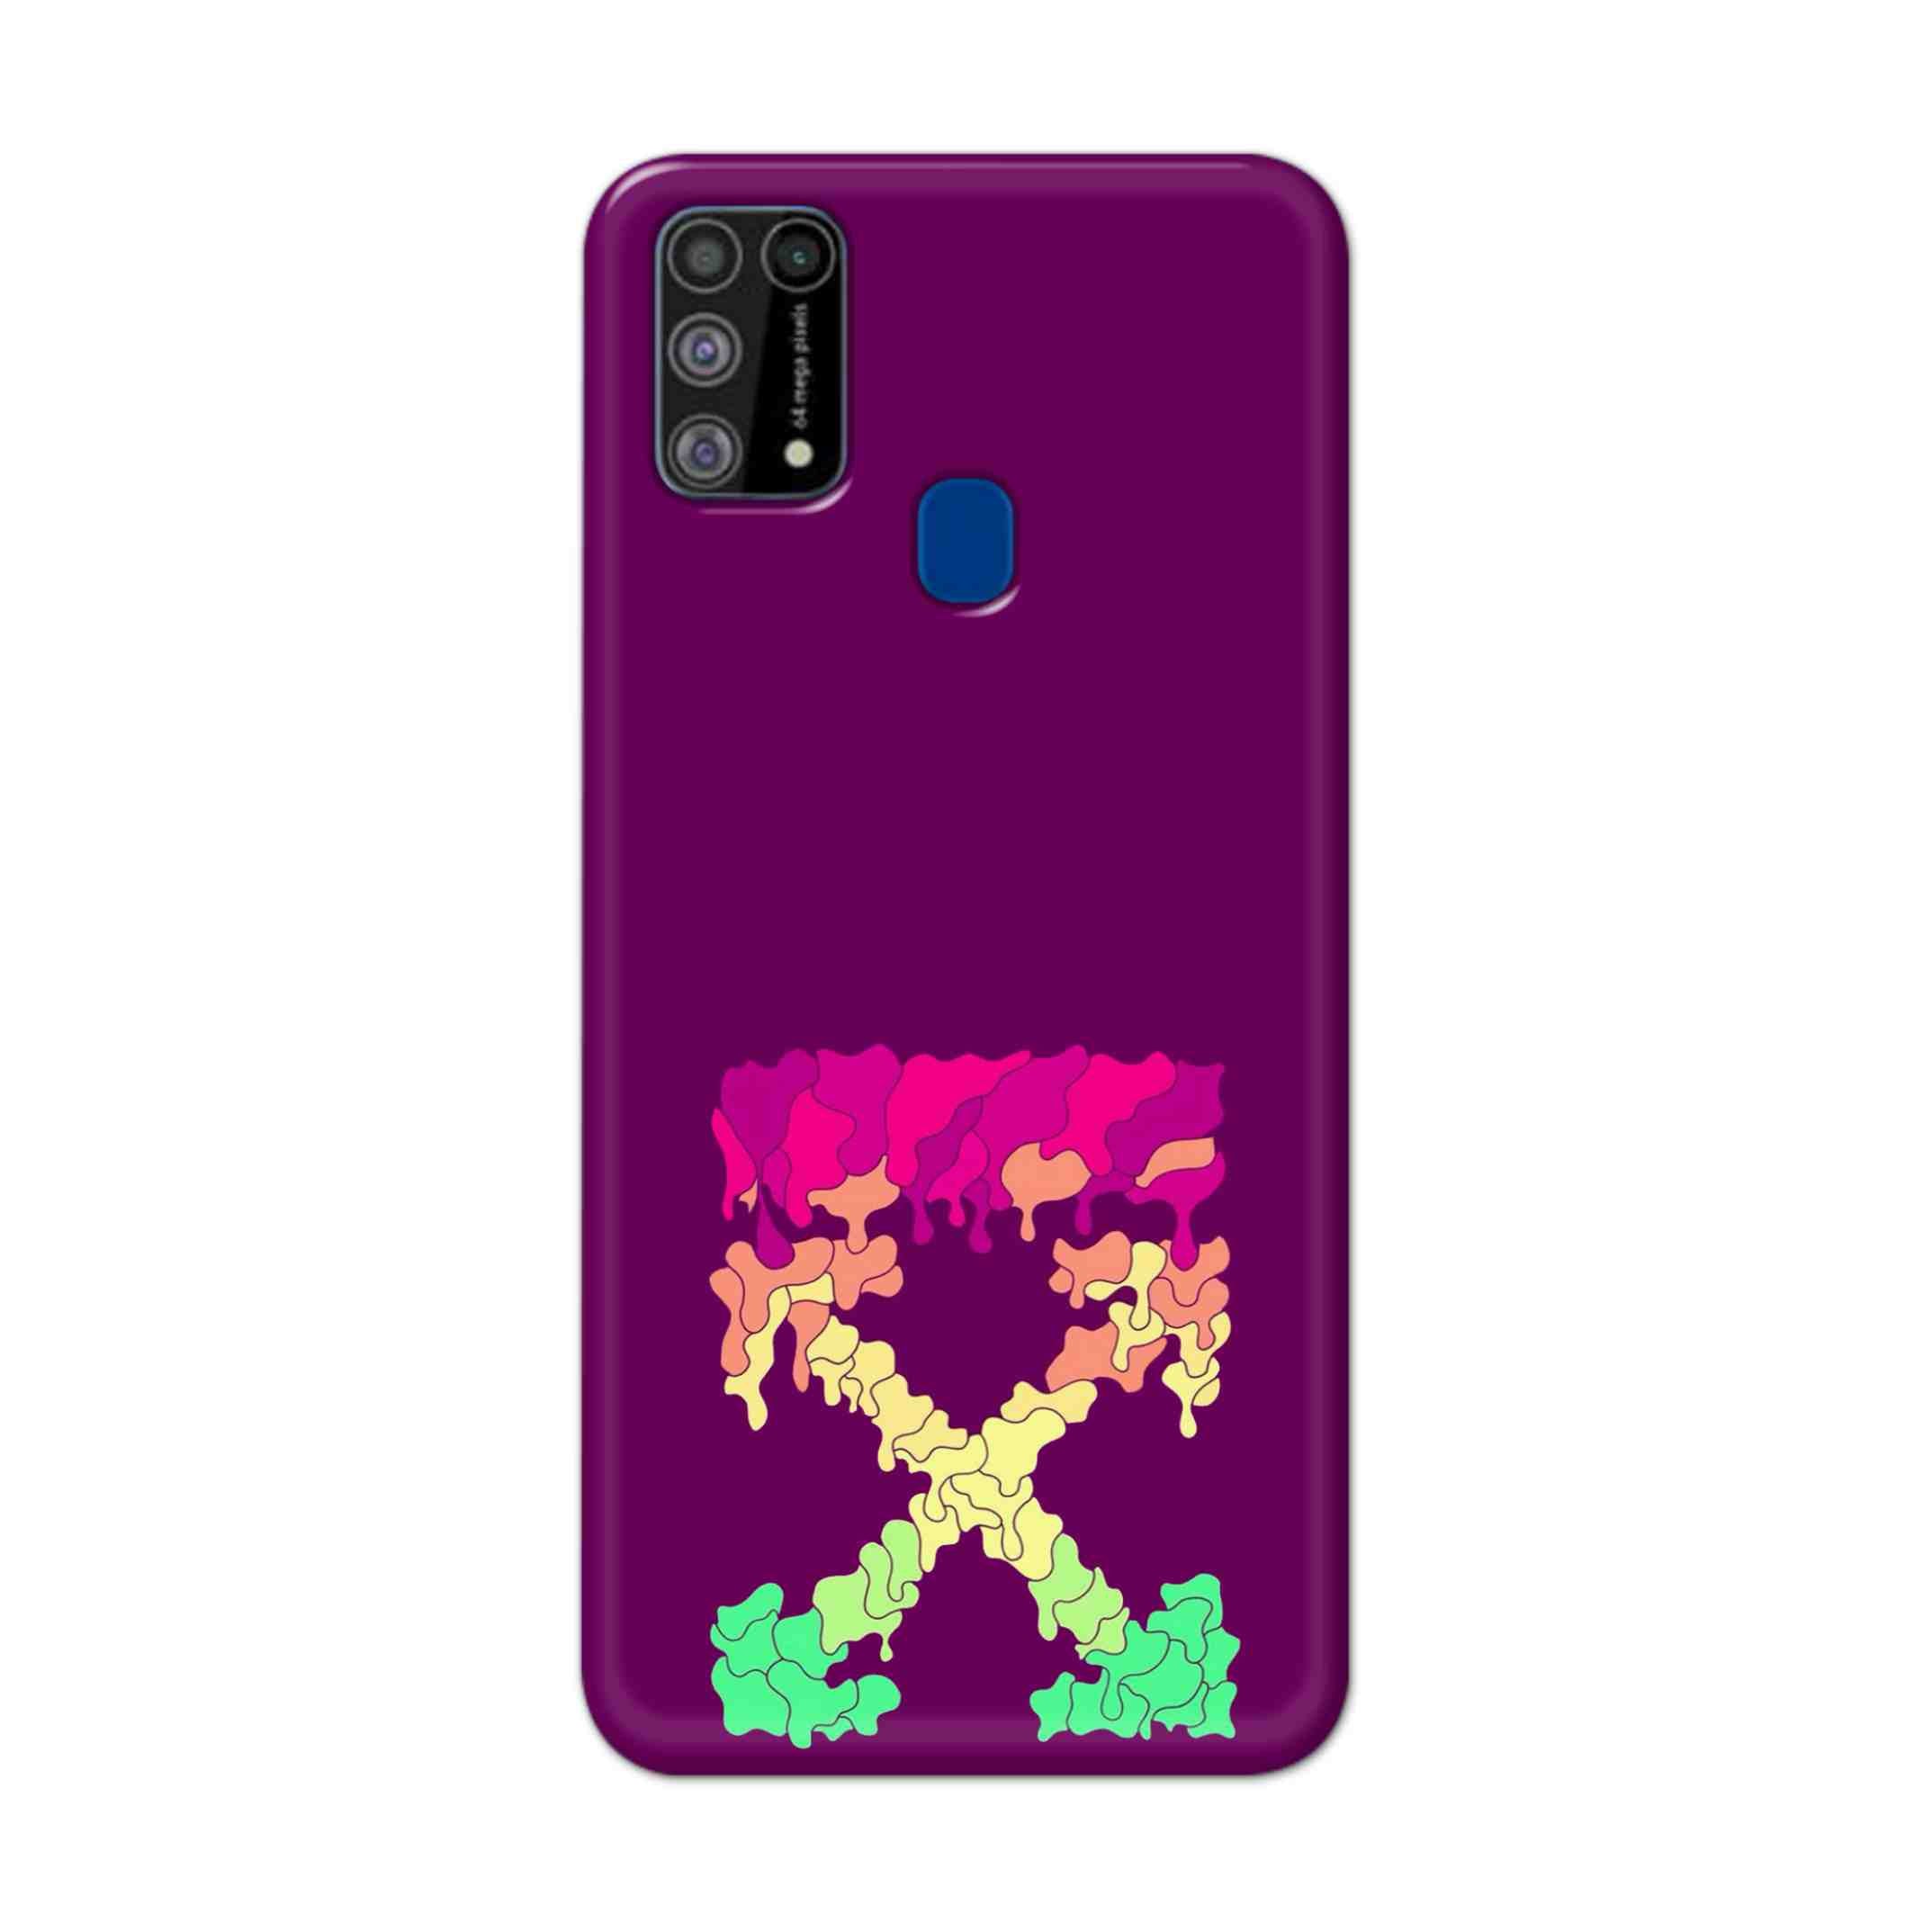 Buy X.O Hard Back Mobile Phone Case Cover For Samsung Galaxy M31 Online